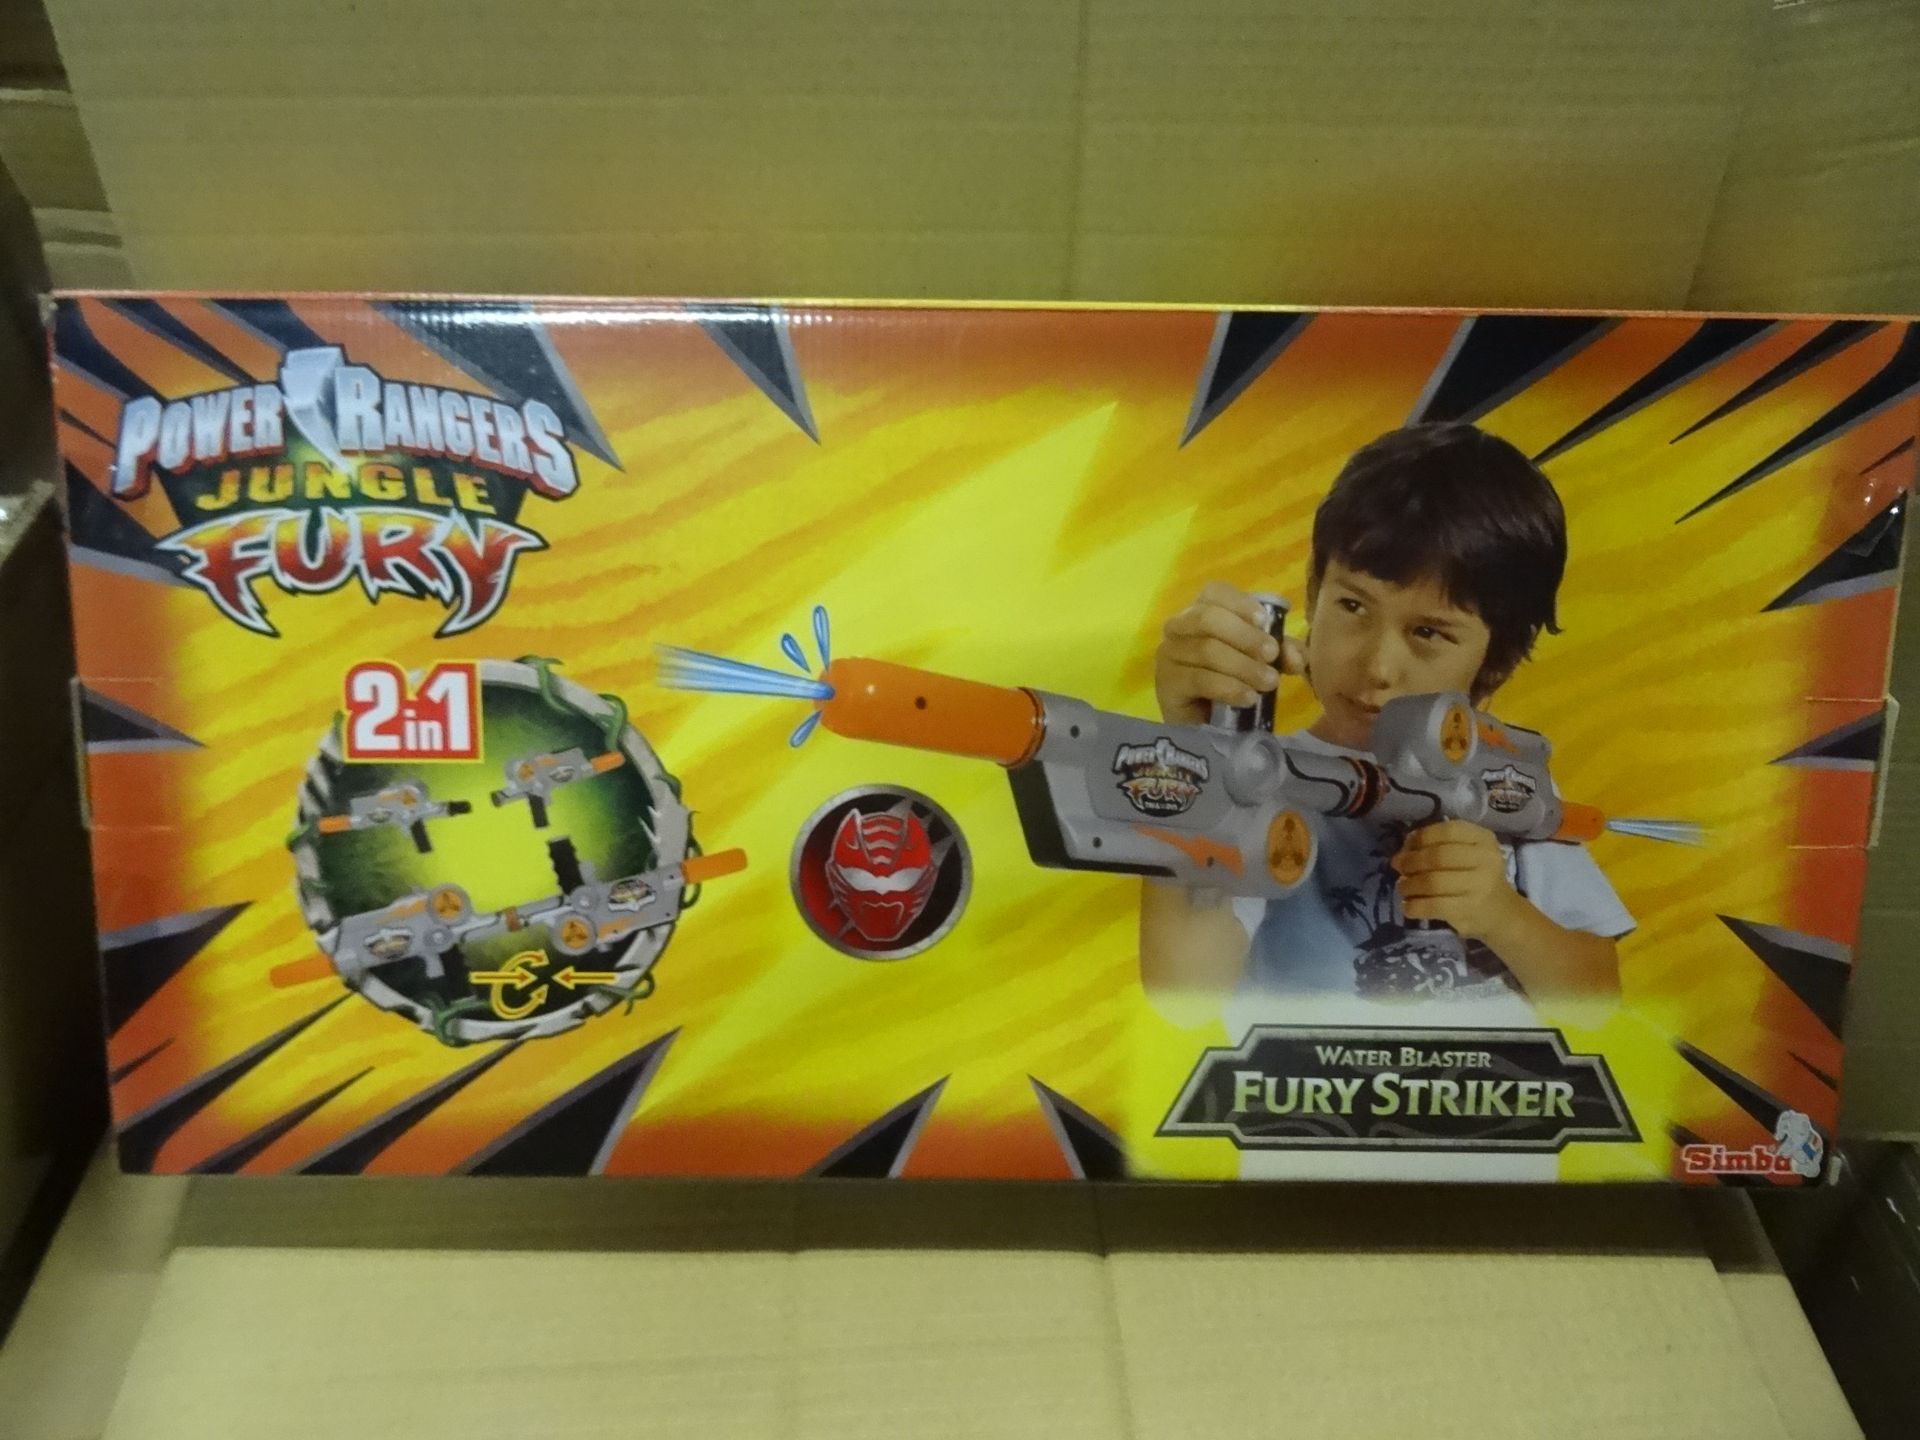 12 x Power Rangers Jungle Fury Water Blasters 2 in 1. High Quality Water Blaster. Brand new and - Image 3 of 5